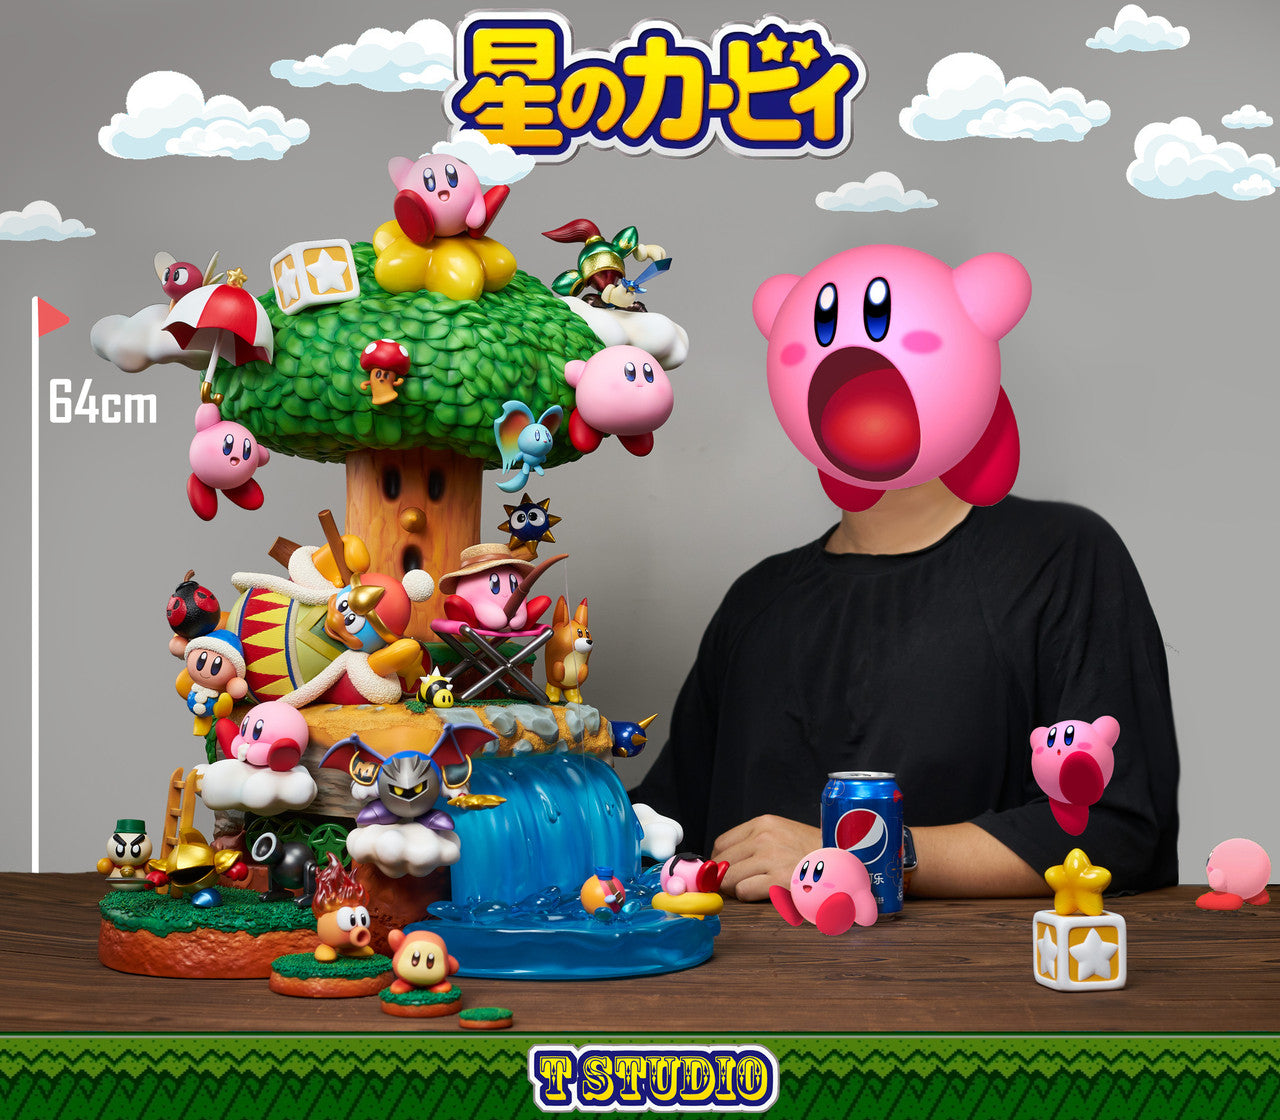 T Studio - Kirby Resin Statue (shipping not included in price)